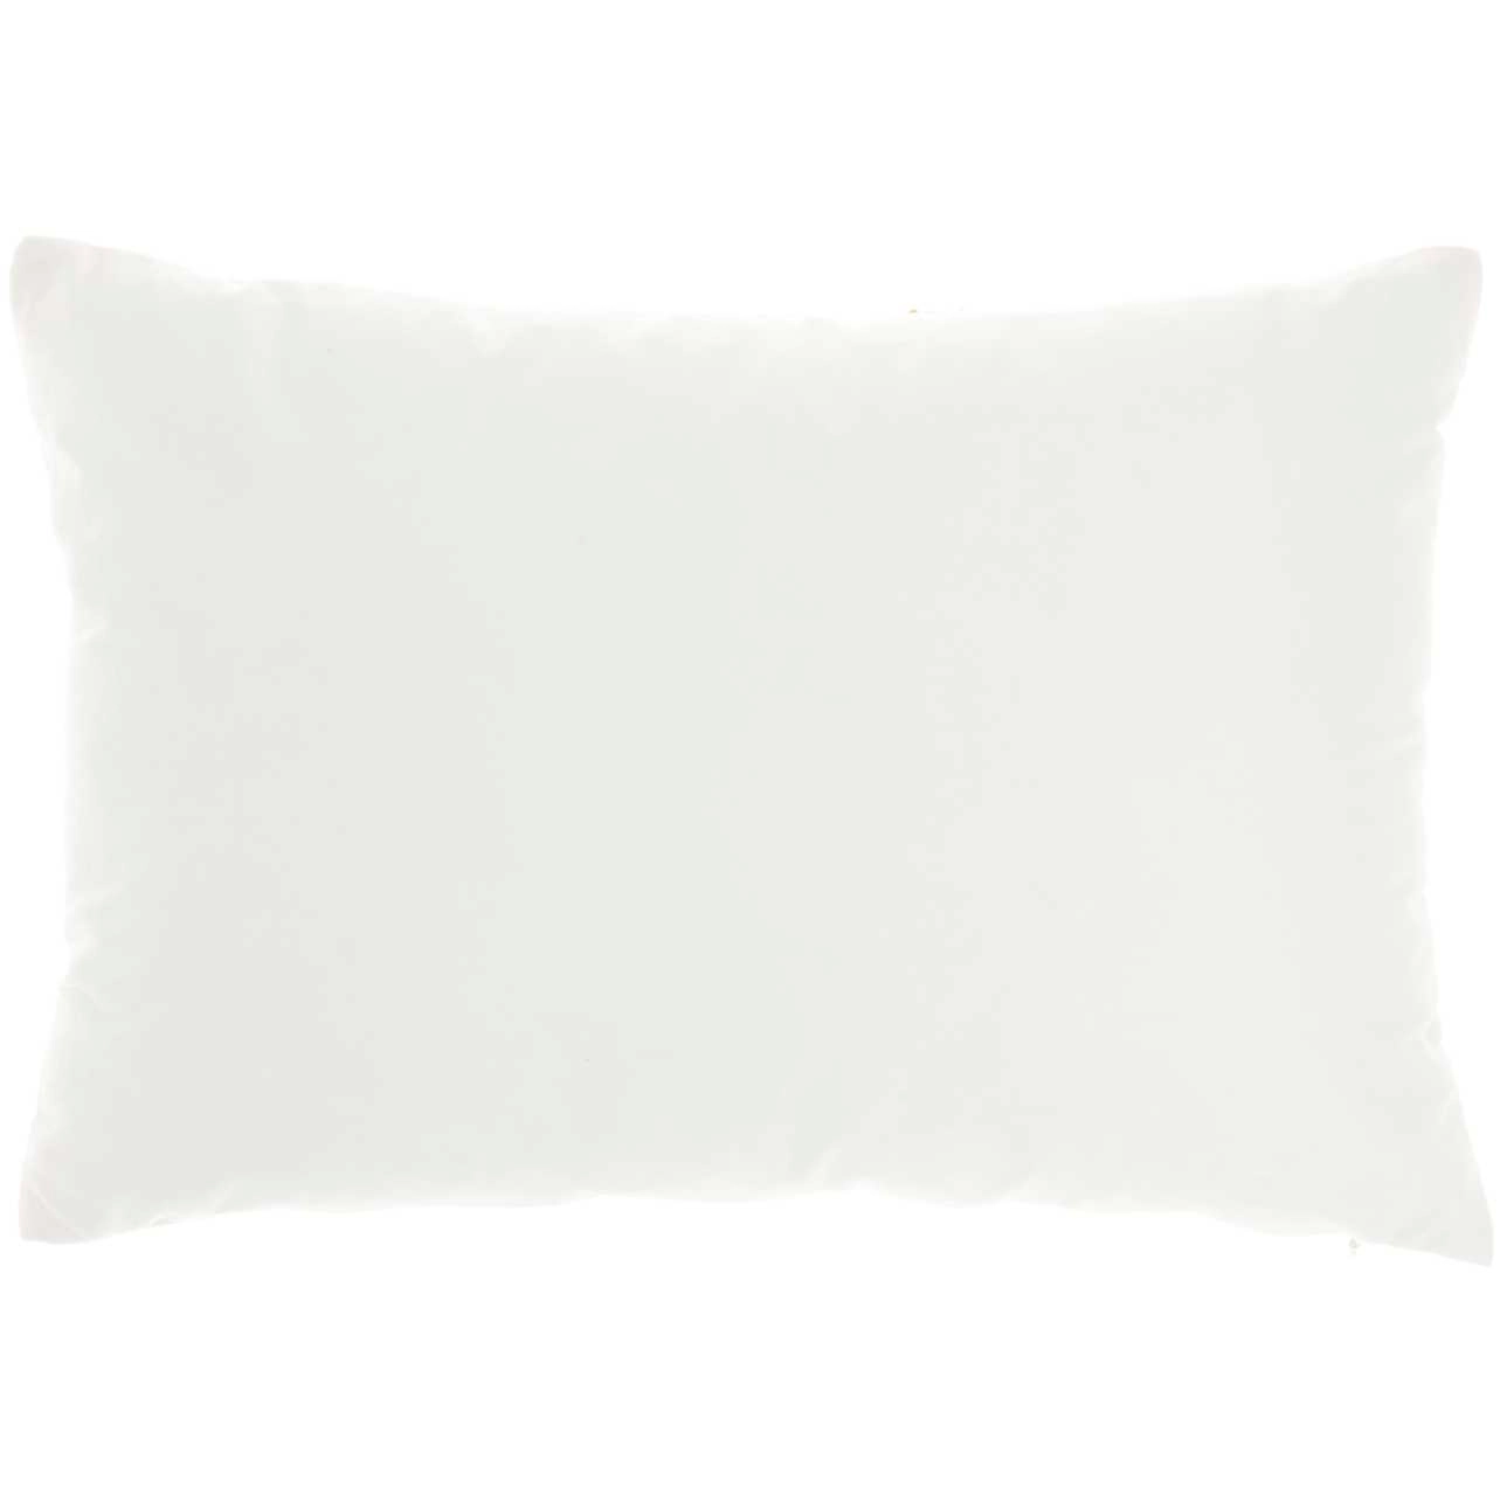 Luminescence Accent Pillow Silver Image of Backside of Pillow